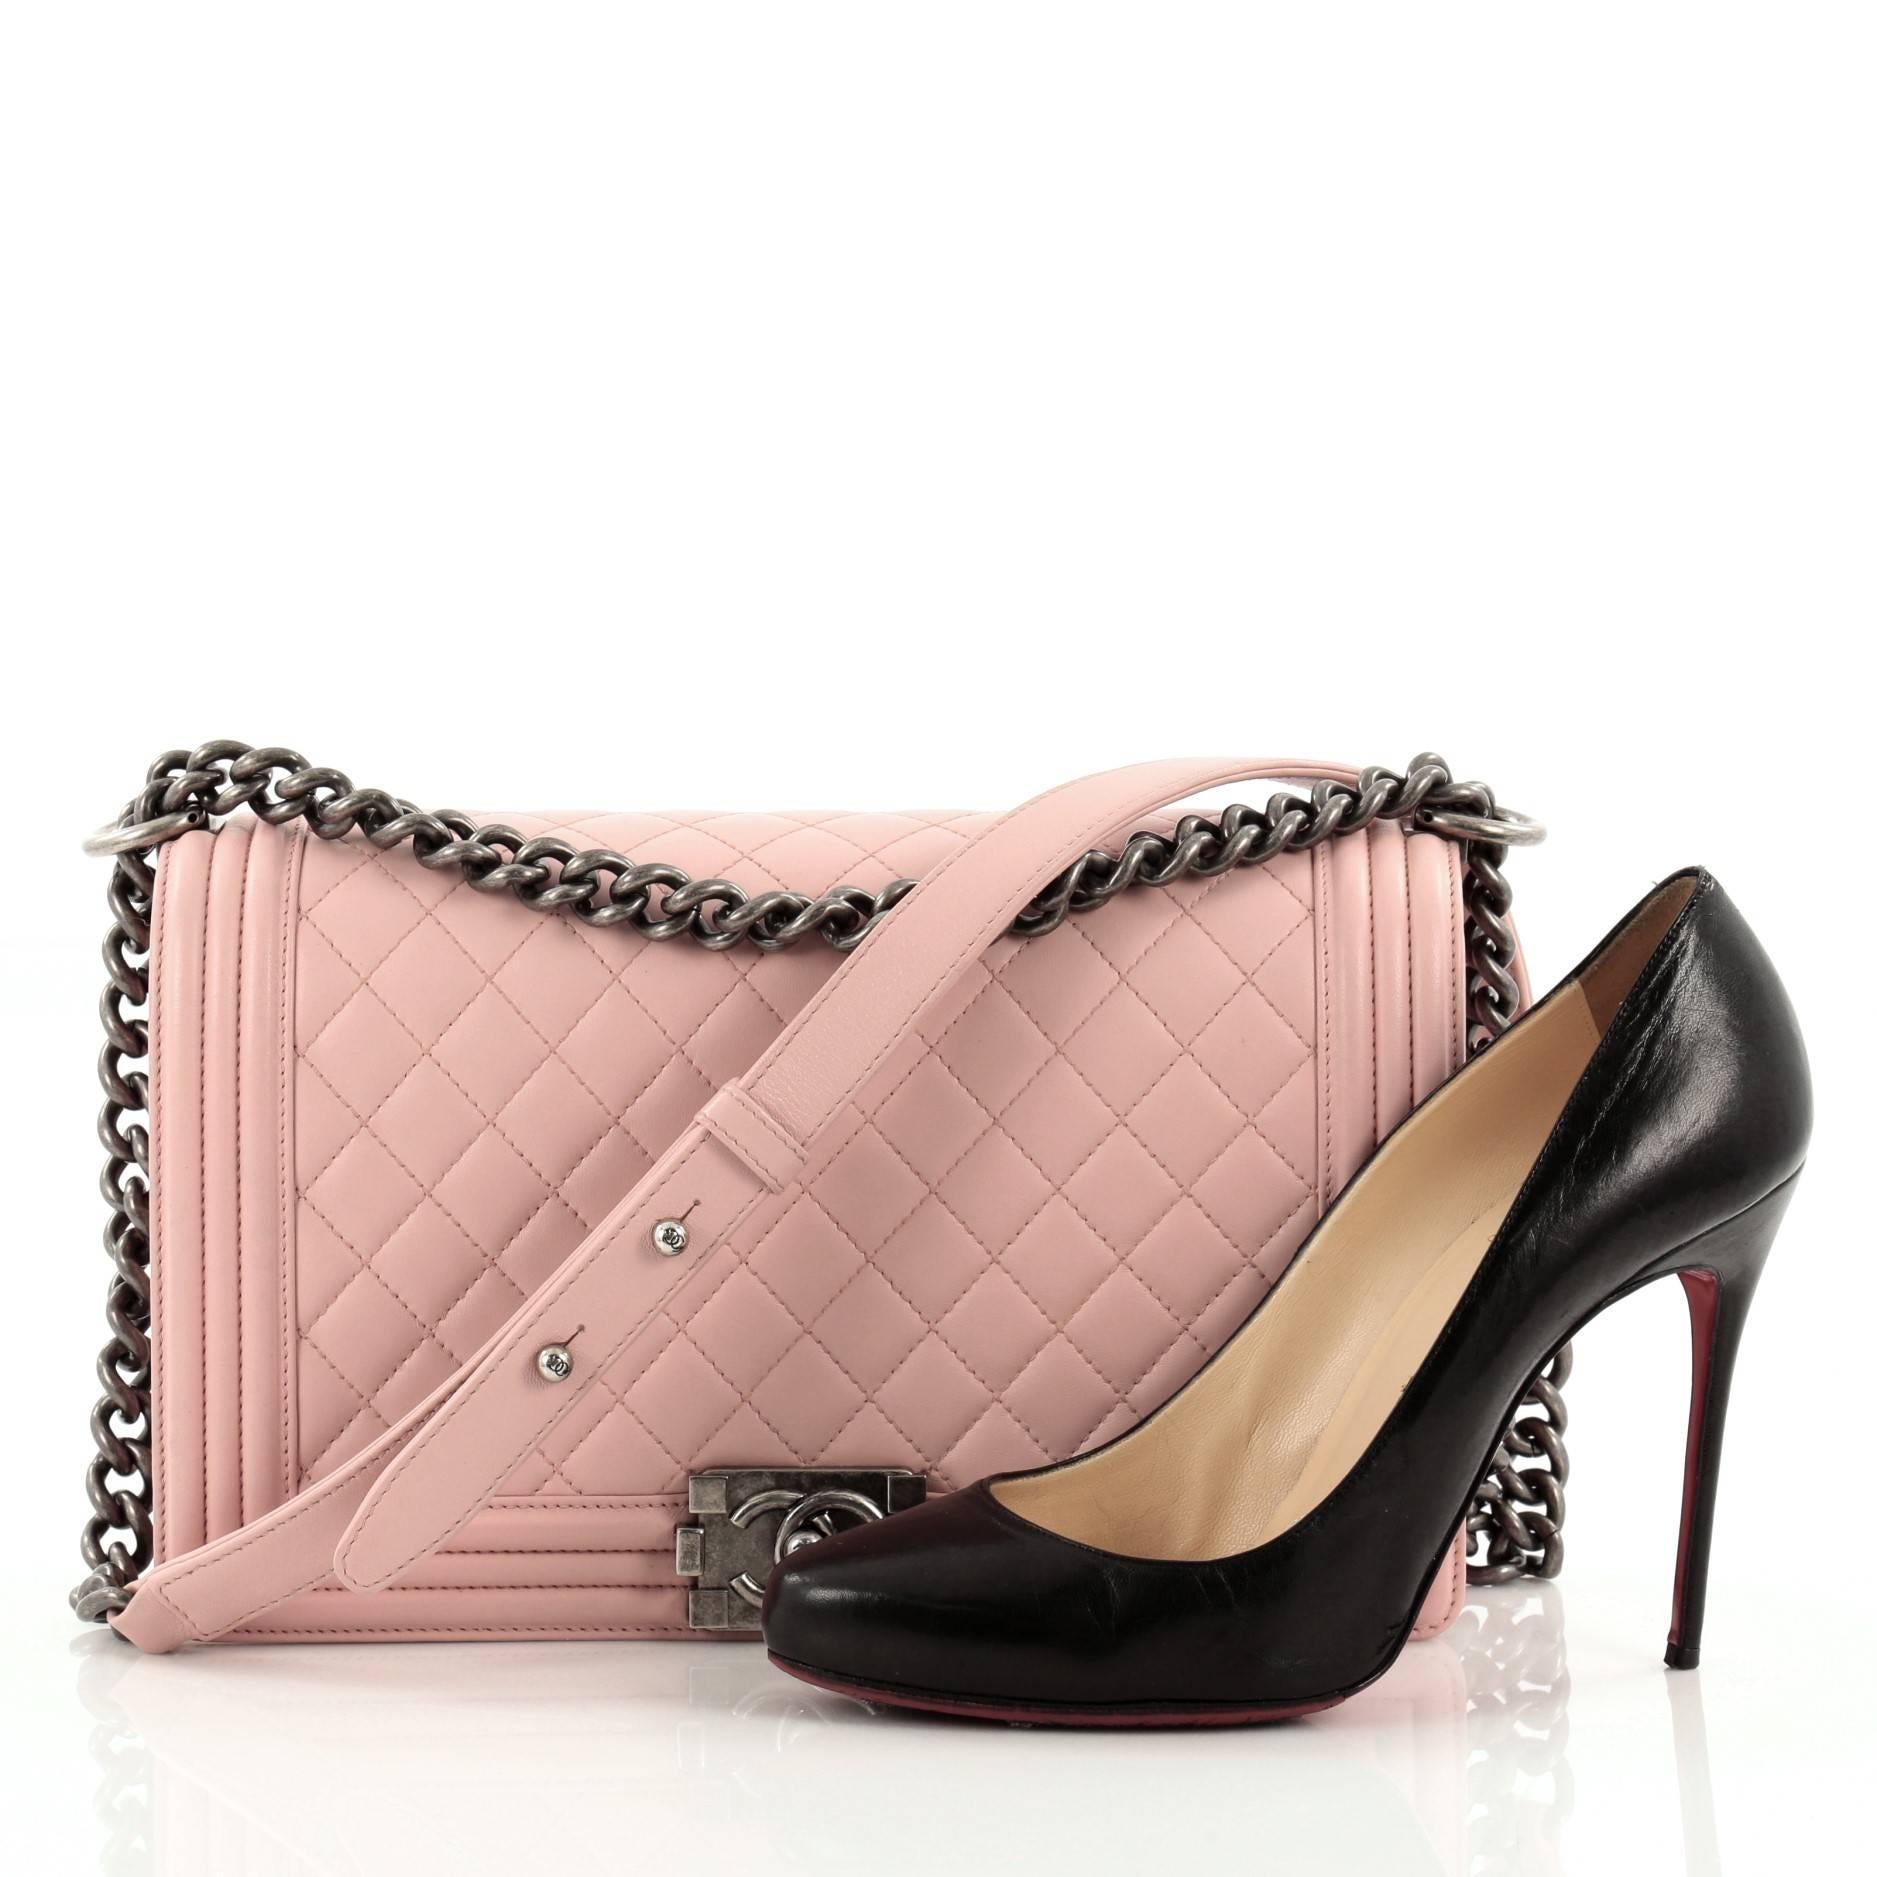 This authentic Chanel Boy Flap Quilted Lambskin New Medium is every woman's dream. Crafted from baby pink diamond quilted lambskin leather, this enviable Boy flap bag features a chunky chain link strap with shoulder pad, CC Boy logo push-lock